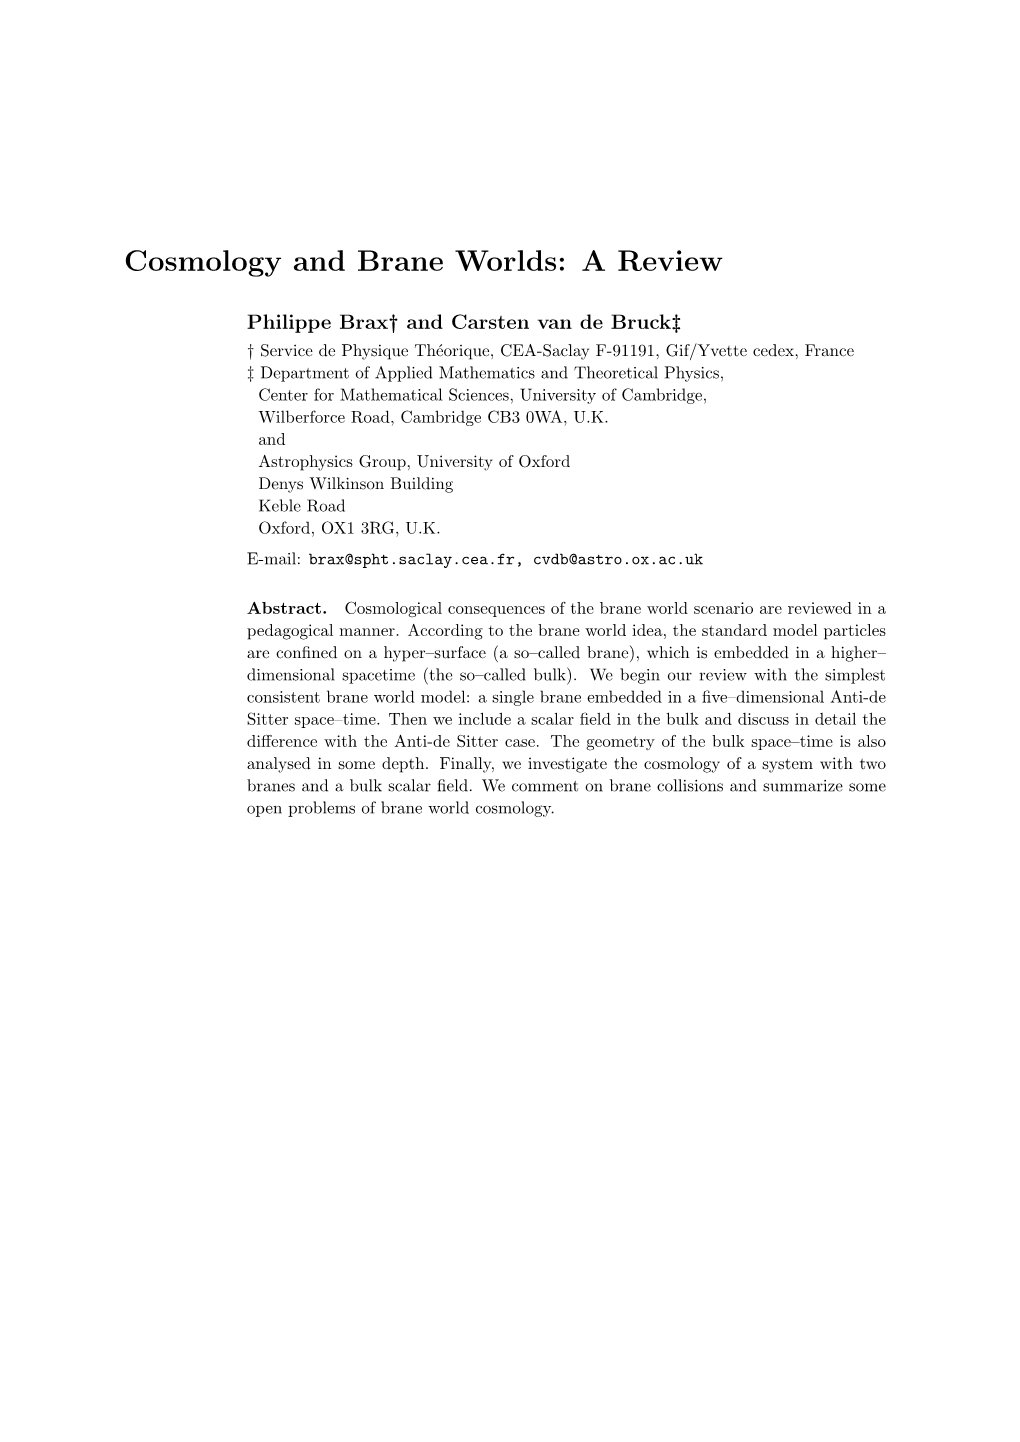 Cosmology and Brane Worlds: a Review